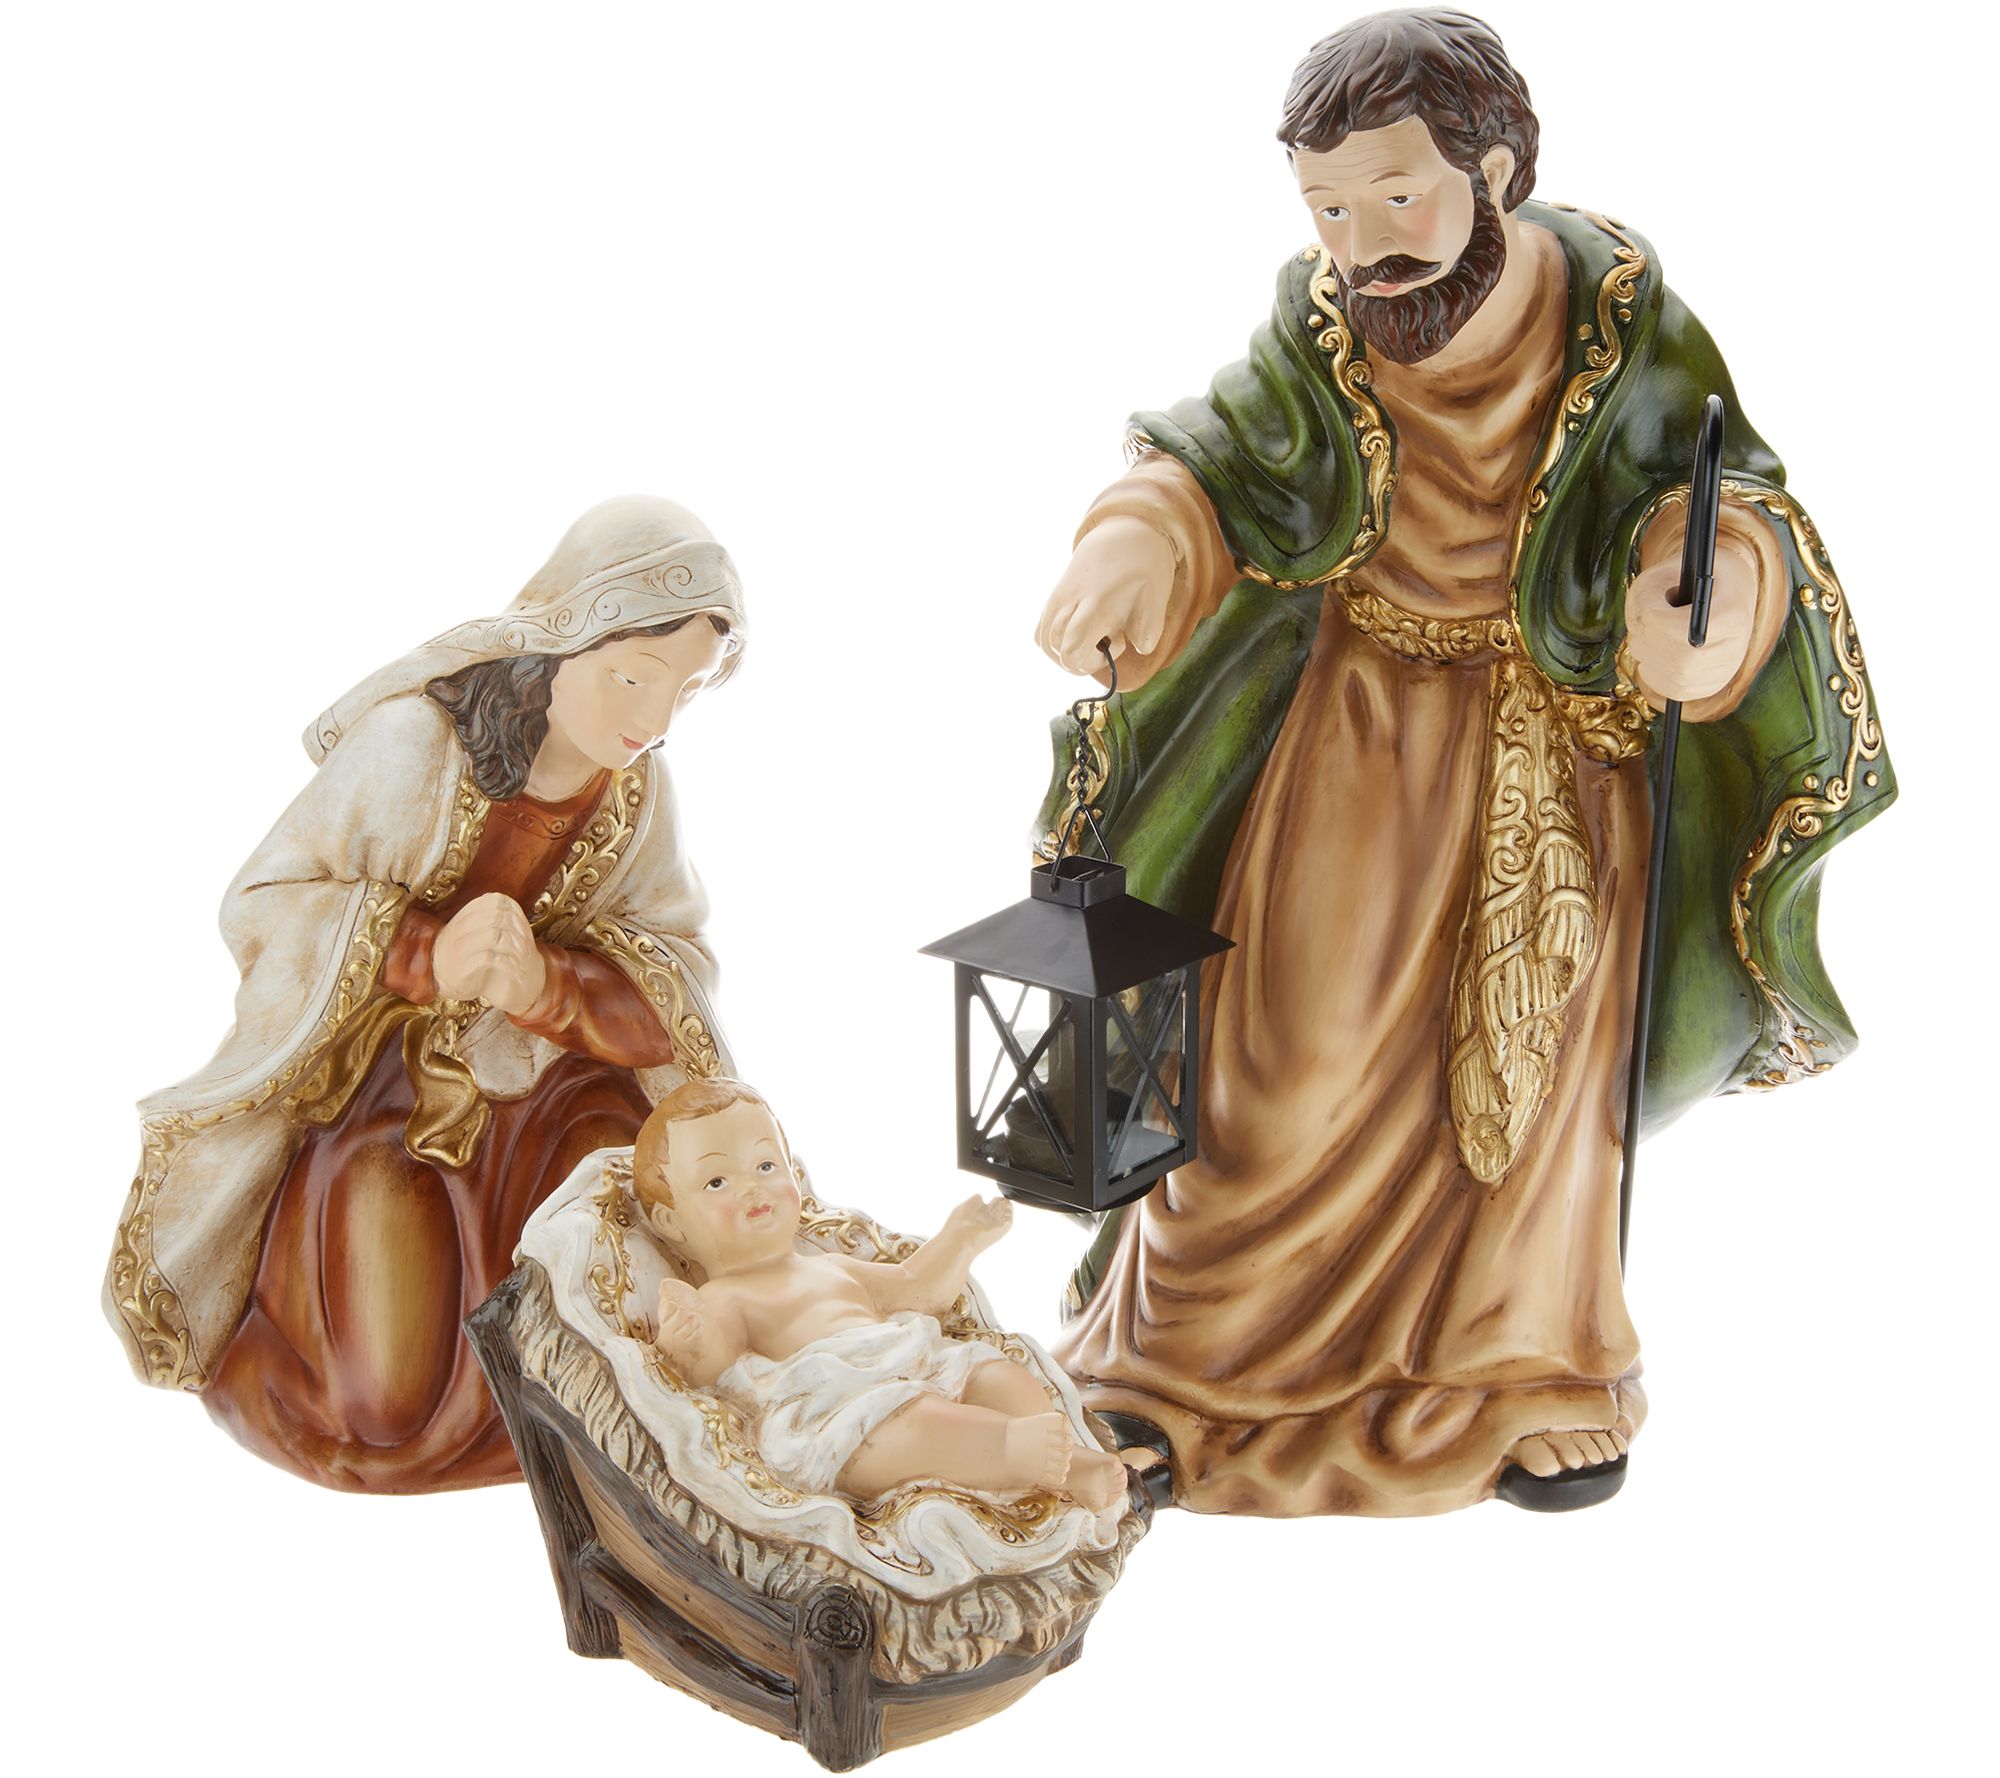 Indoor/Outdoor 3-Piece Holy Family Display by Valerie - QVC.com